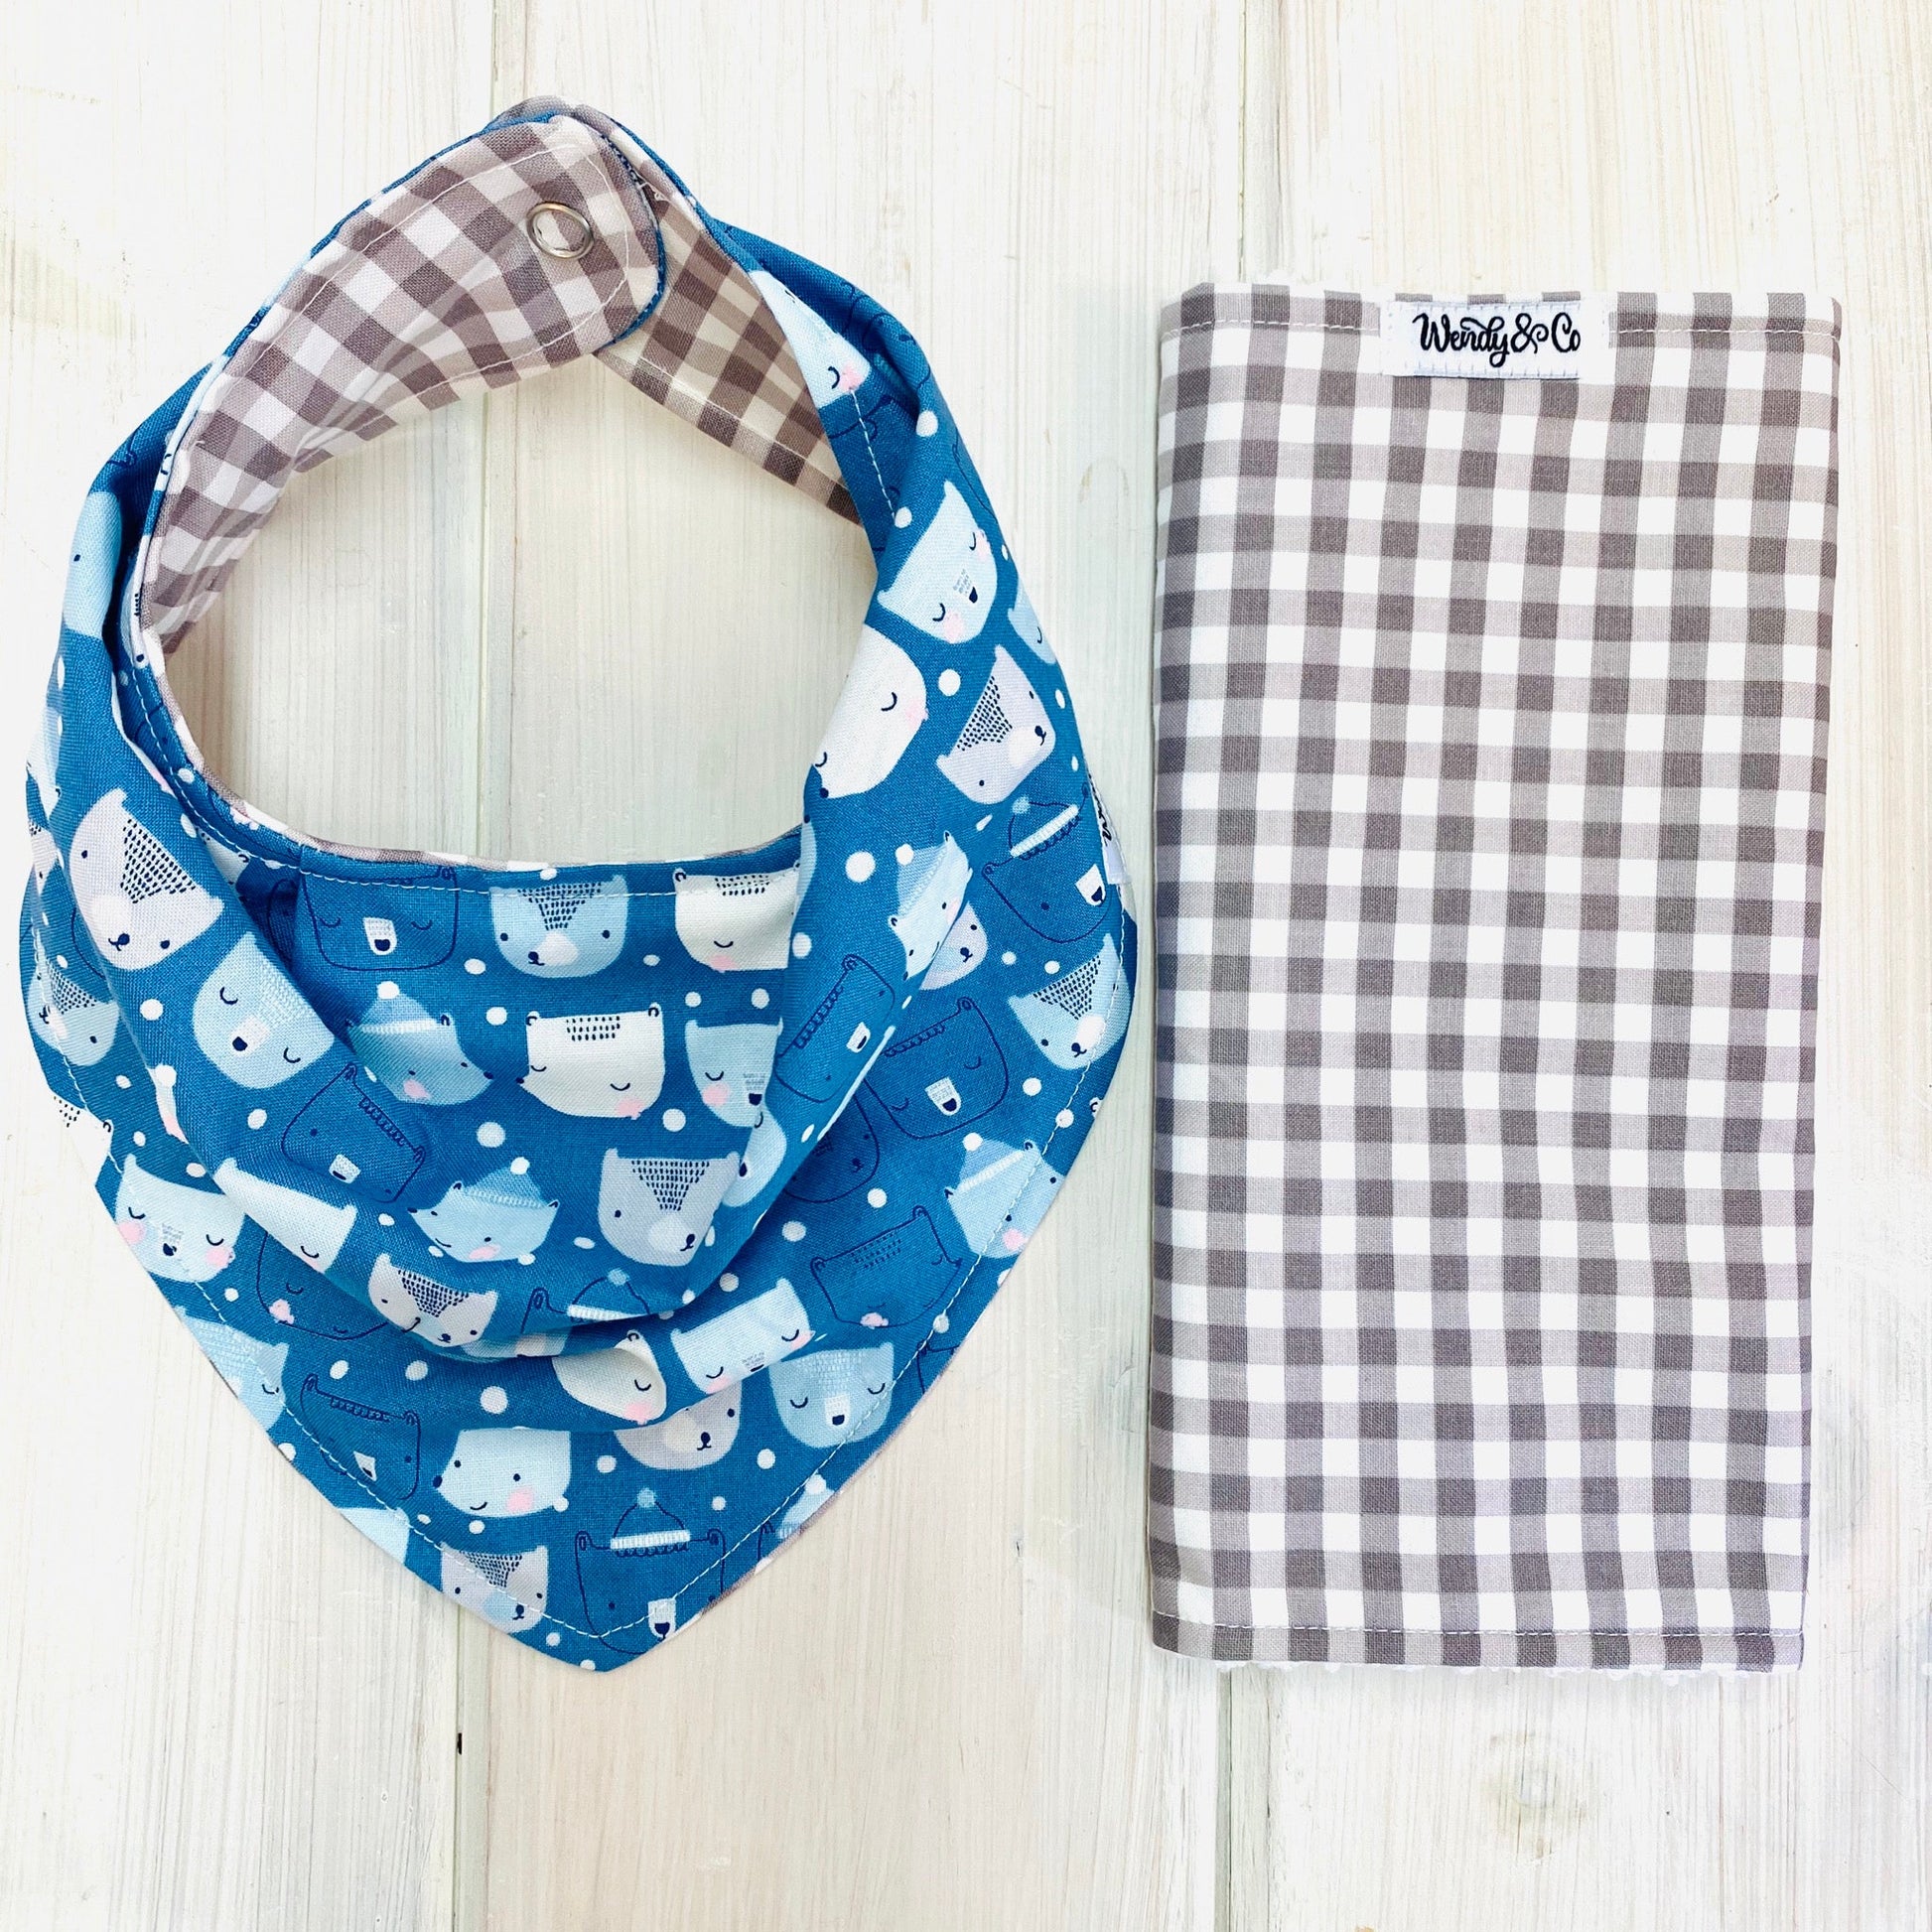 Handmade bandana bib, reversible, shown with burp cloth. Blue fabric with cute bear heads scattered in rows.